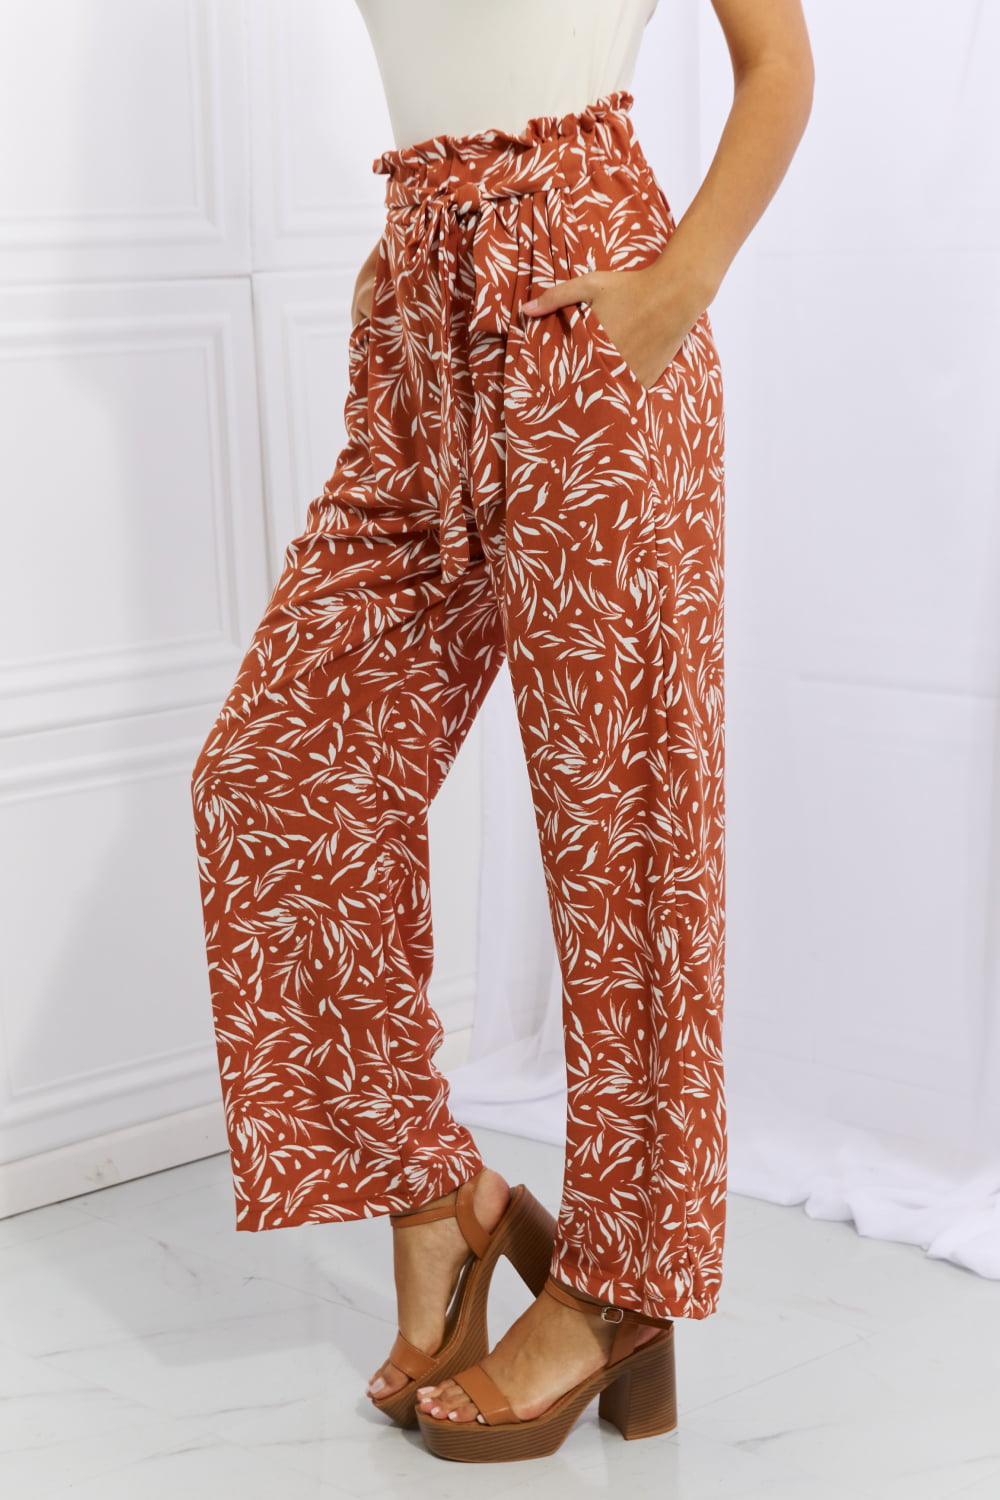 Sienna Heimish Right Angle Full Size Geometric Printed Pants in Red Orange Sentient Beauty Fashions Apparel & Accessories